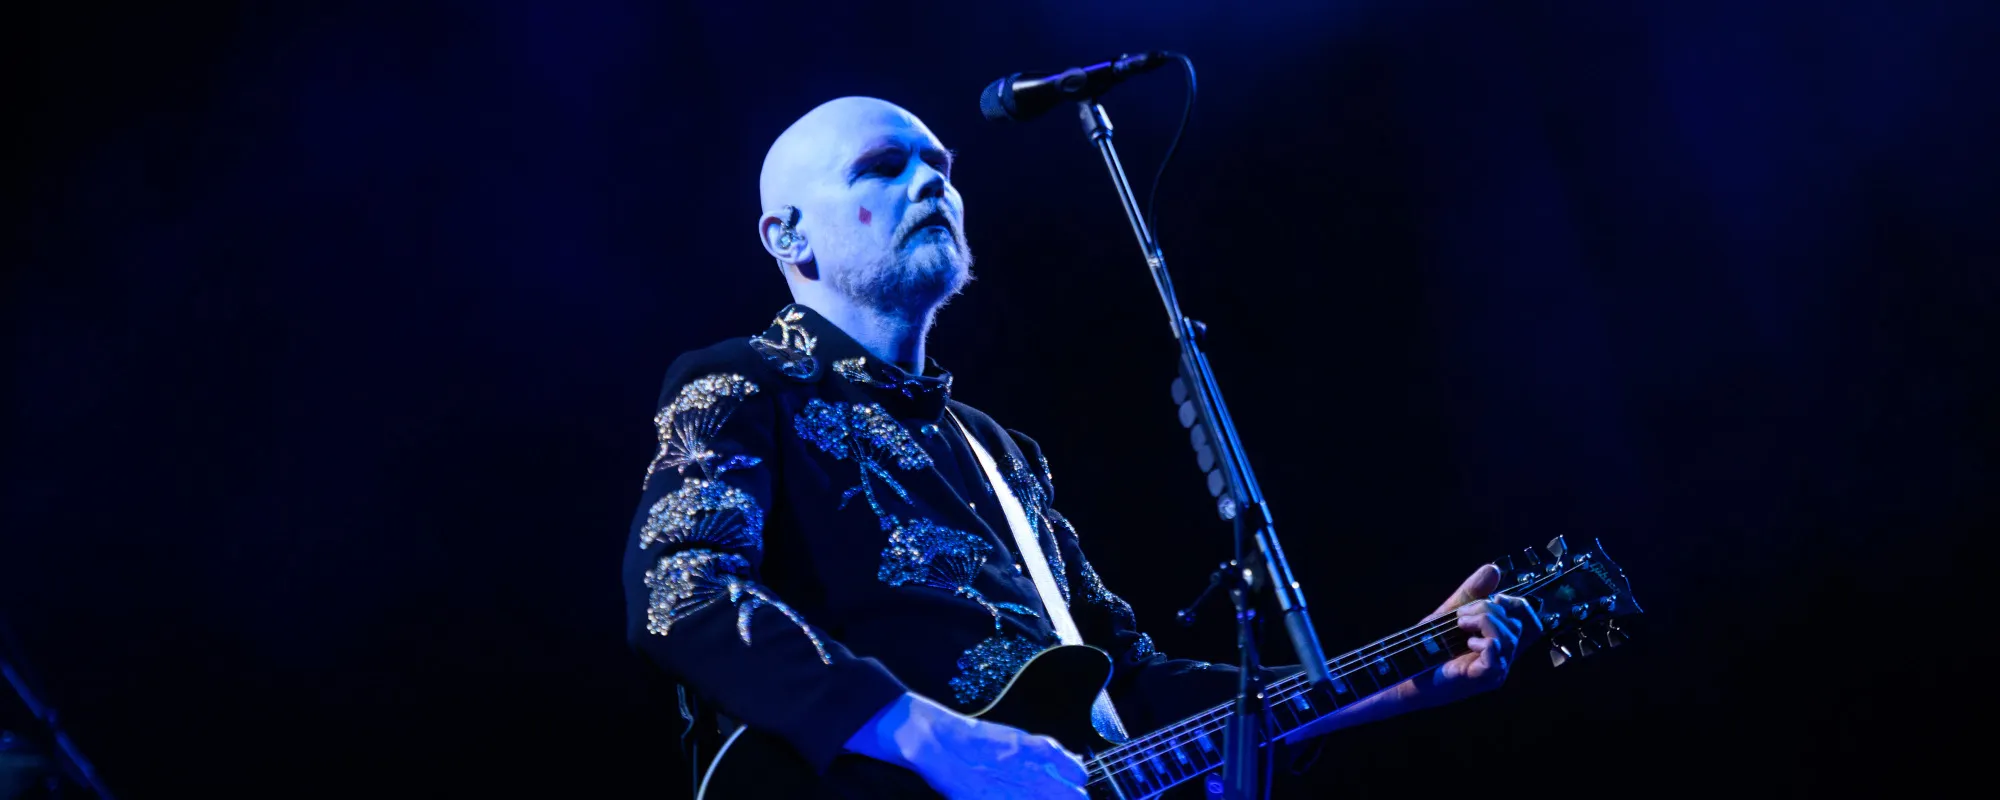 3 Songs You Didn’t Know The Smashing Pumpkins’ Billy Corgan Wrote for Other Artists